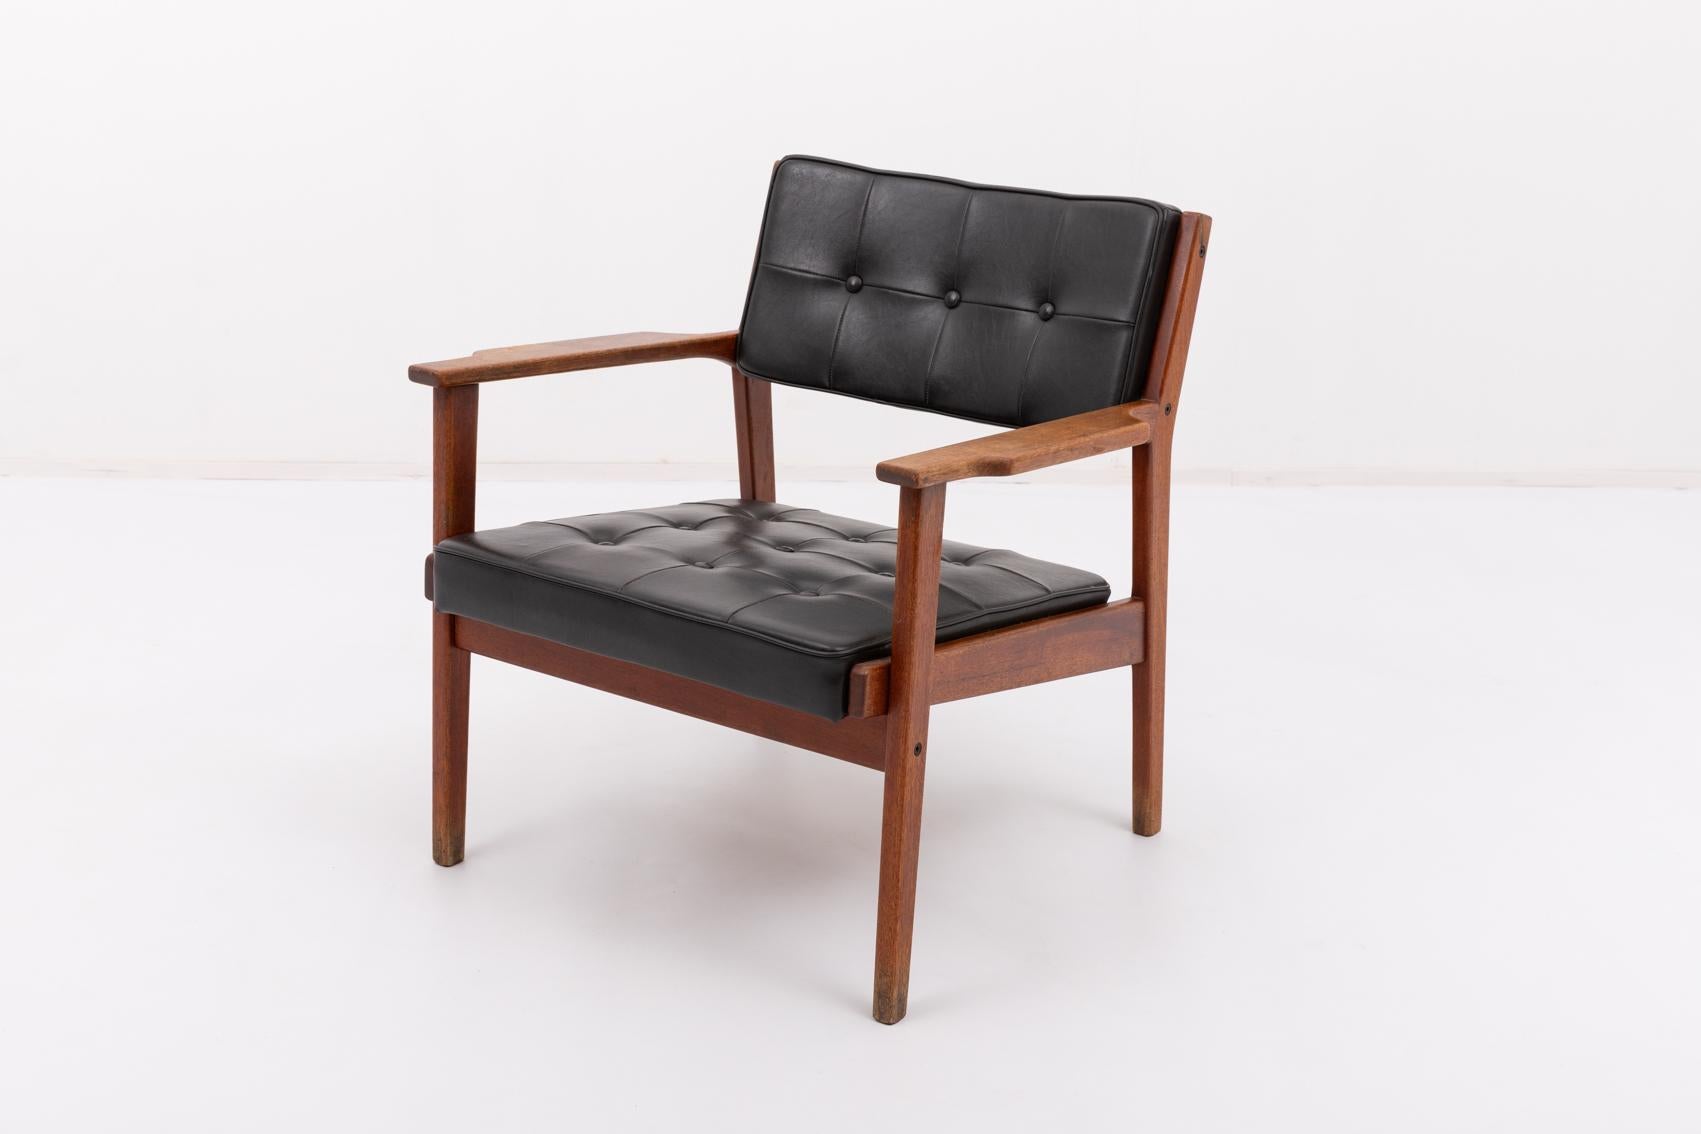 Modern Danish design armchair from 1960’s on crafted stained oak frame with the seat and backrest upholstered in black faux leather.

Condition
Good, age related usage marks and wear.

Dimensions
width: 69 cm
height: 73 cm
depth: 64 cm
seat height: